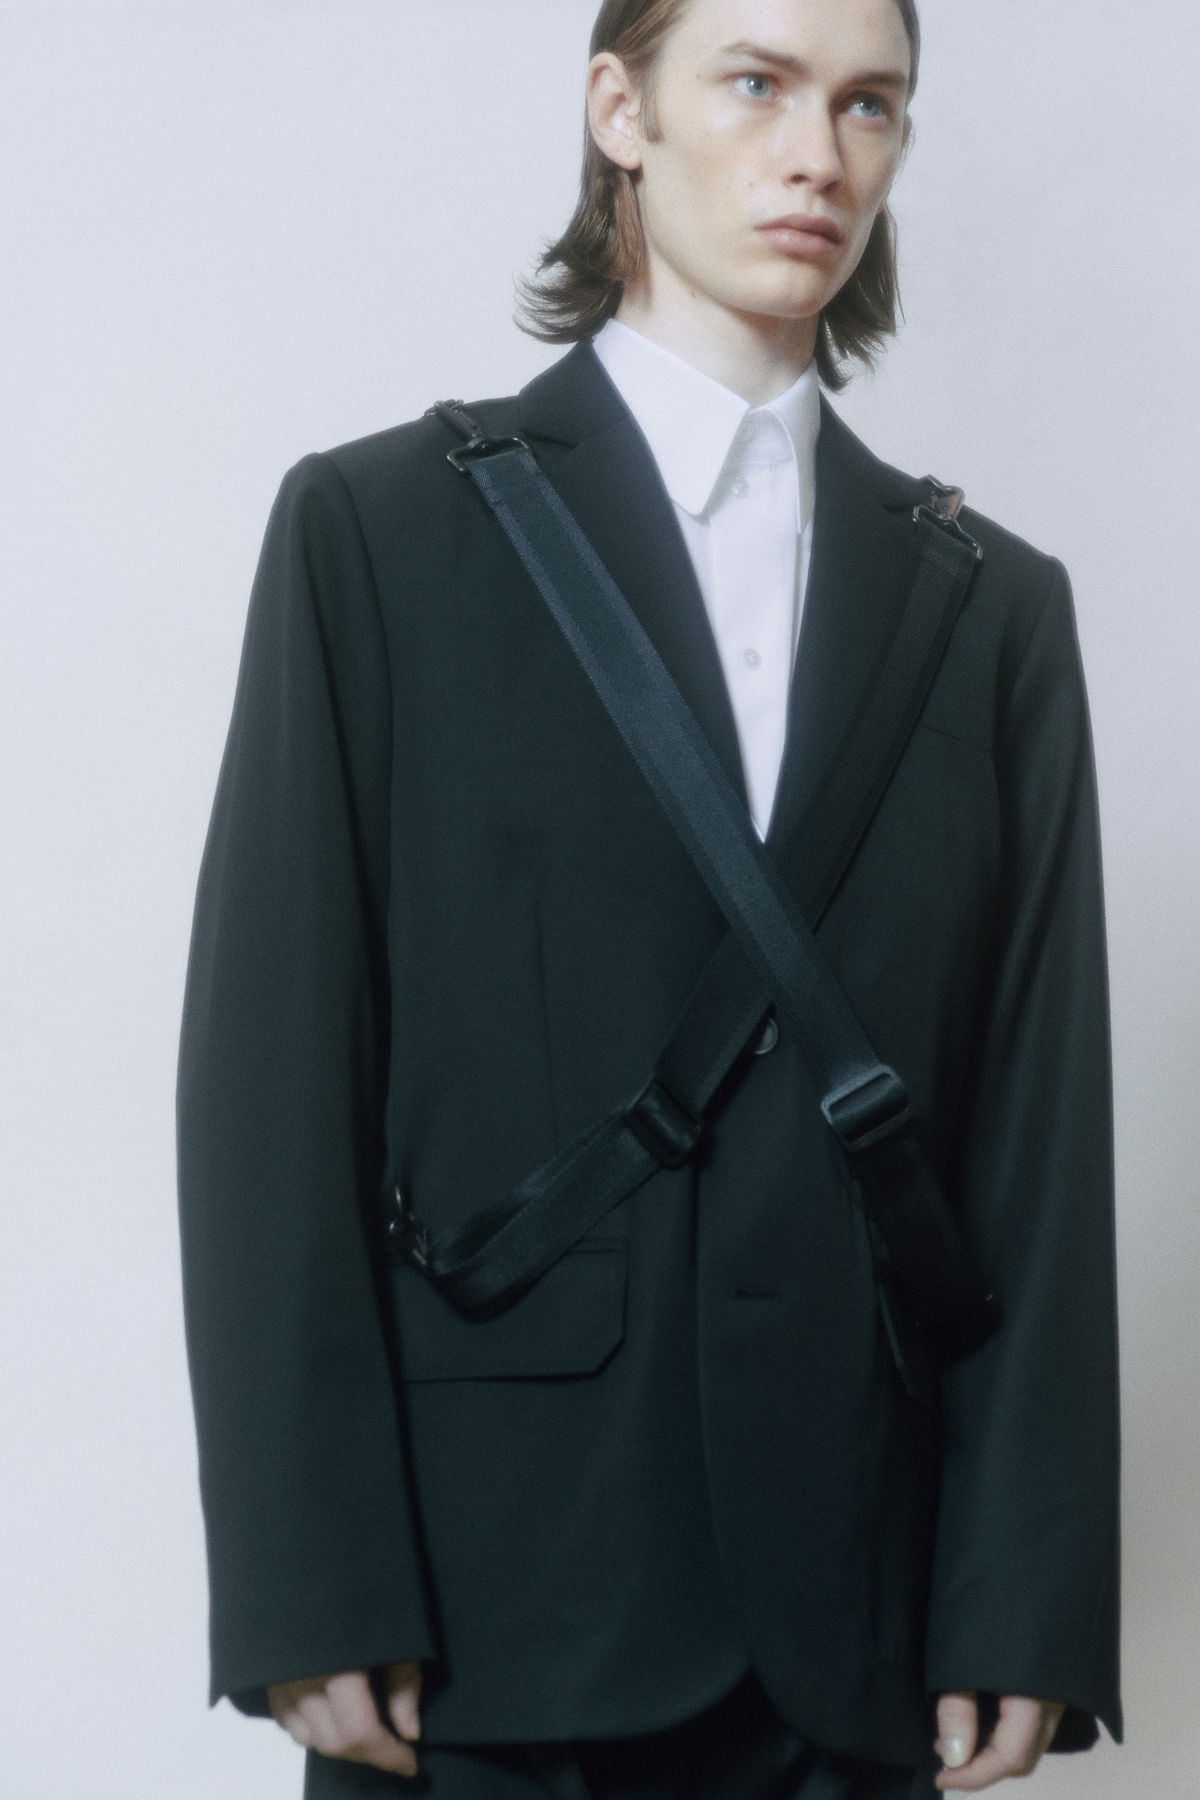 Helmut Lang Presents Its New Autumn Winter 2022 Collection: Utility. Civility. Deviance.